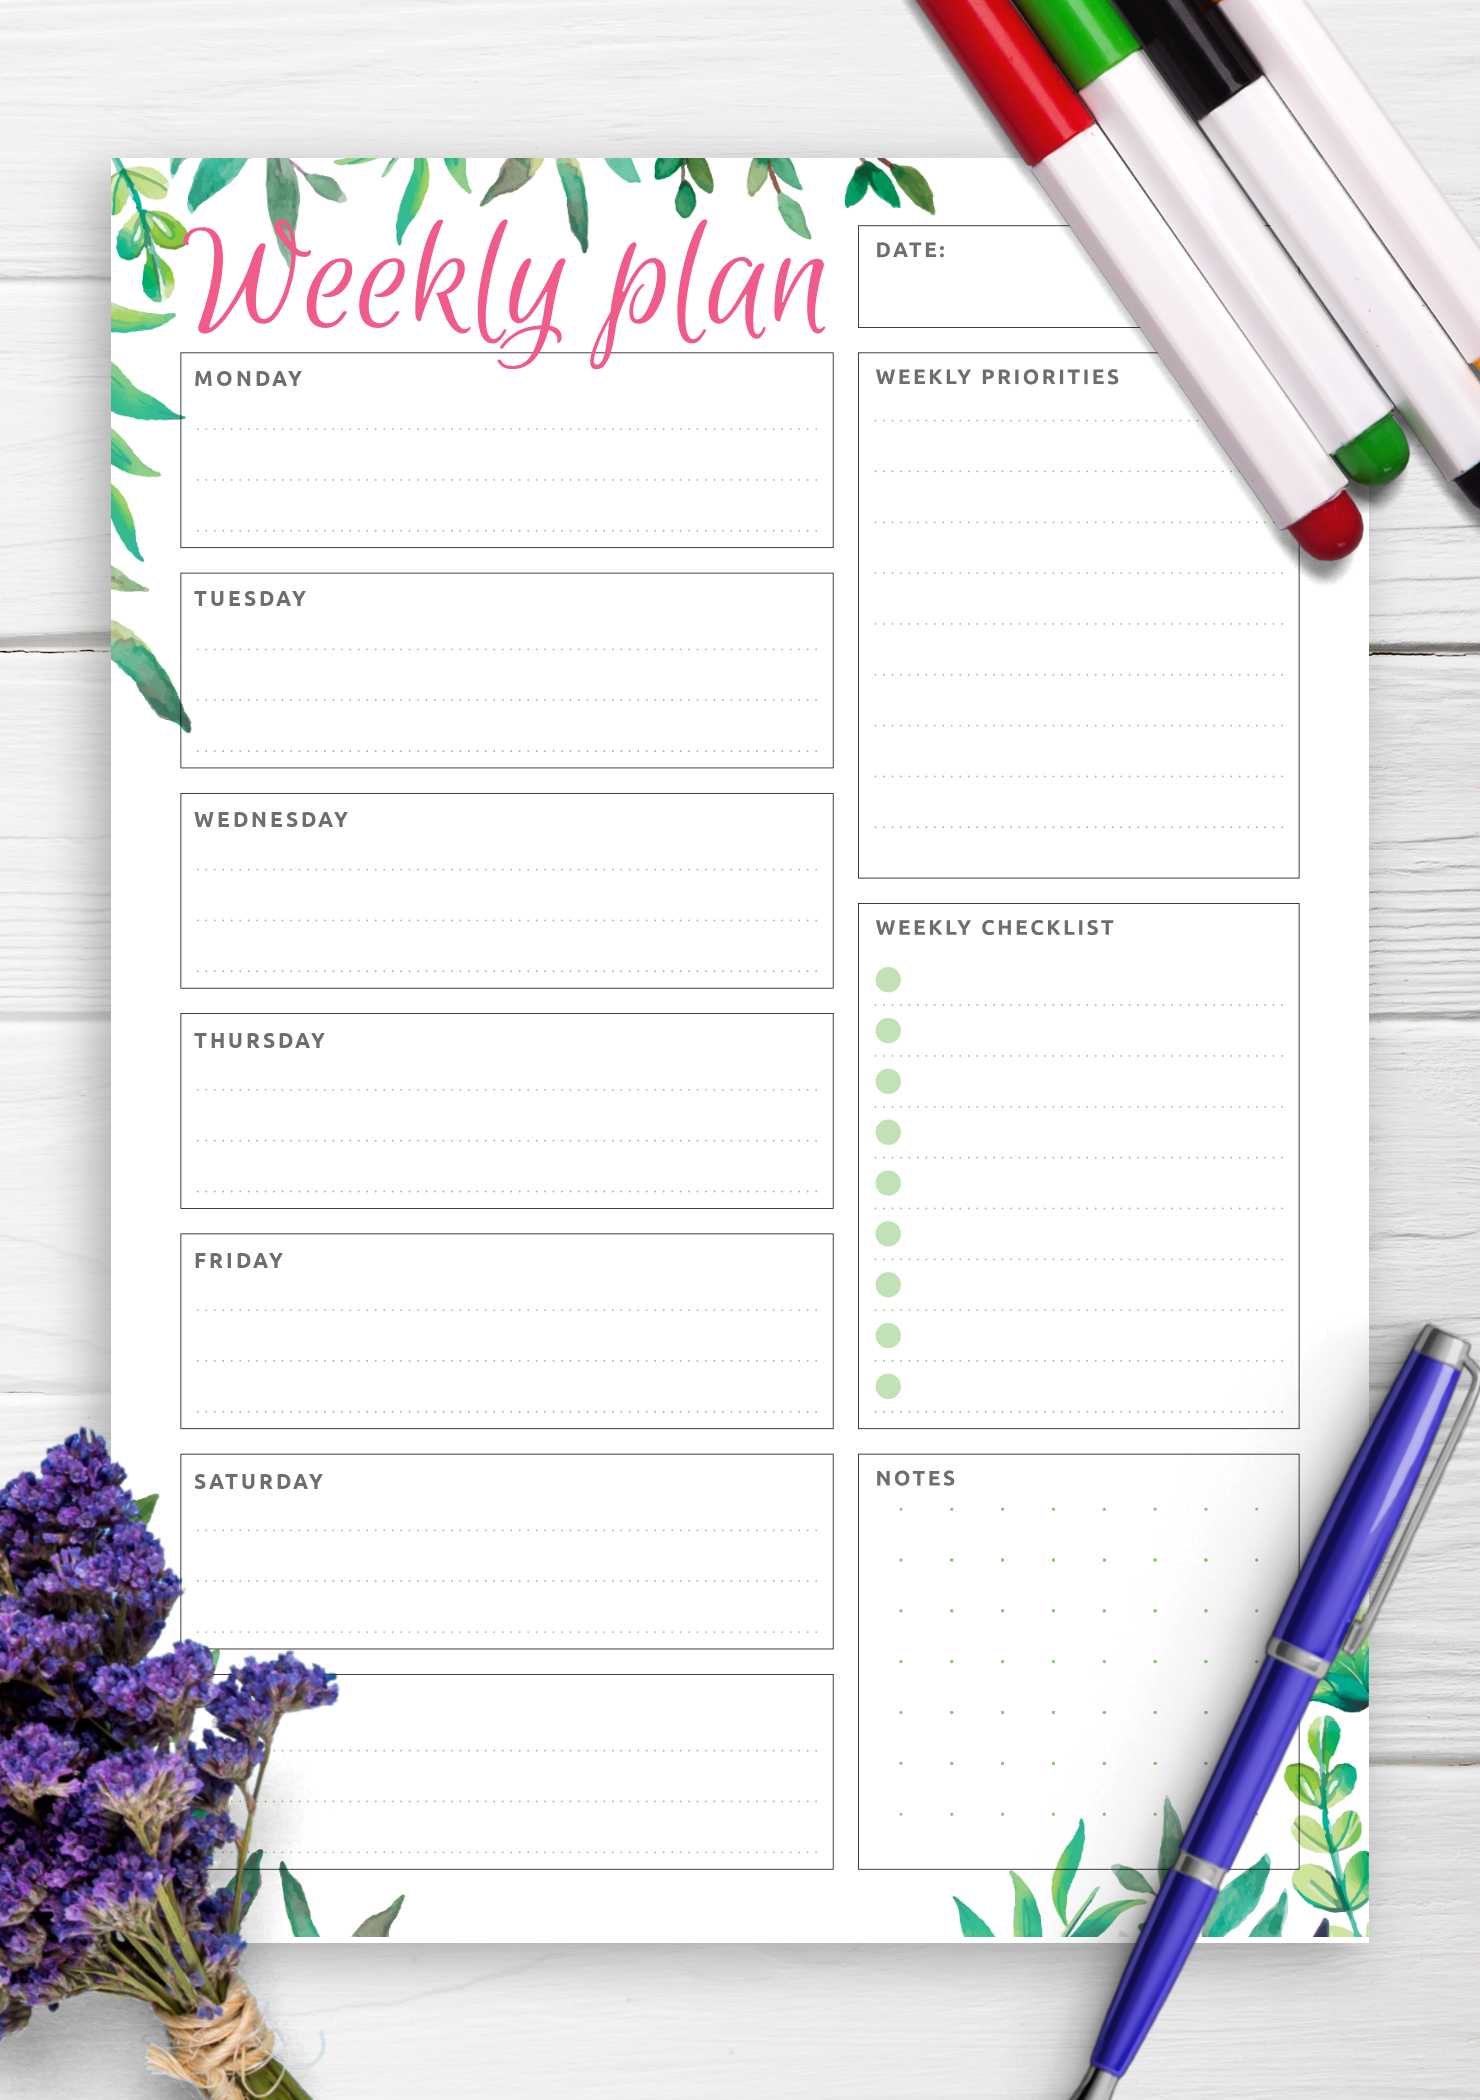 schedule-template-cute-daily-is-schedule-template-cute-daily-any-good